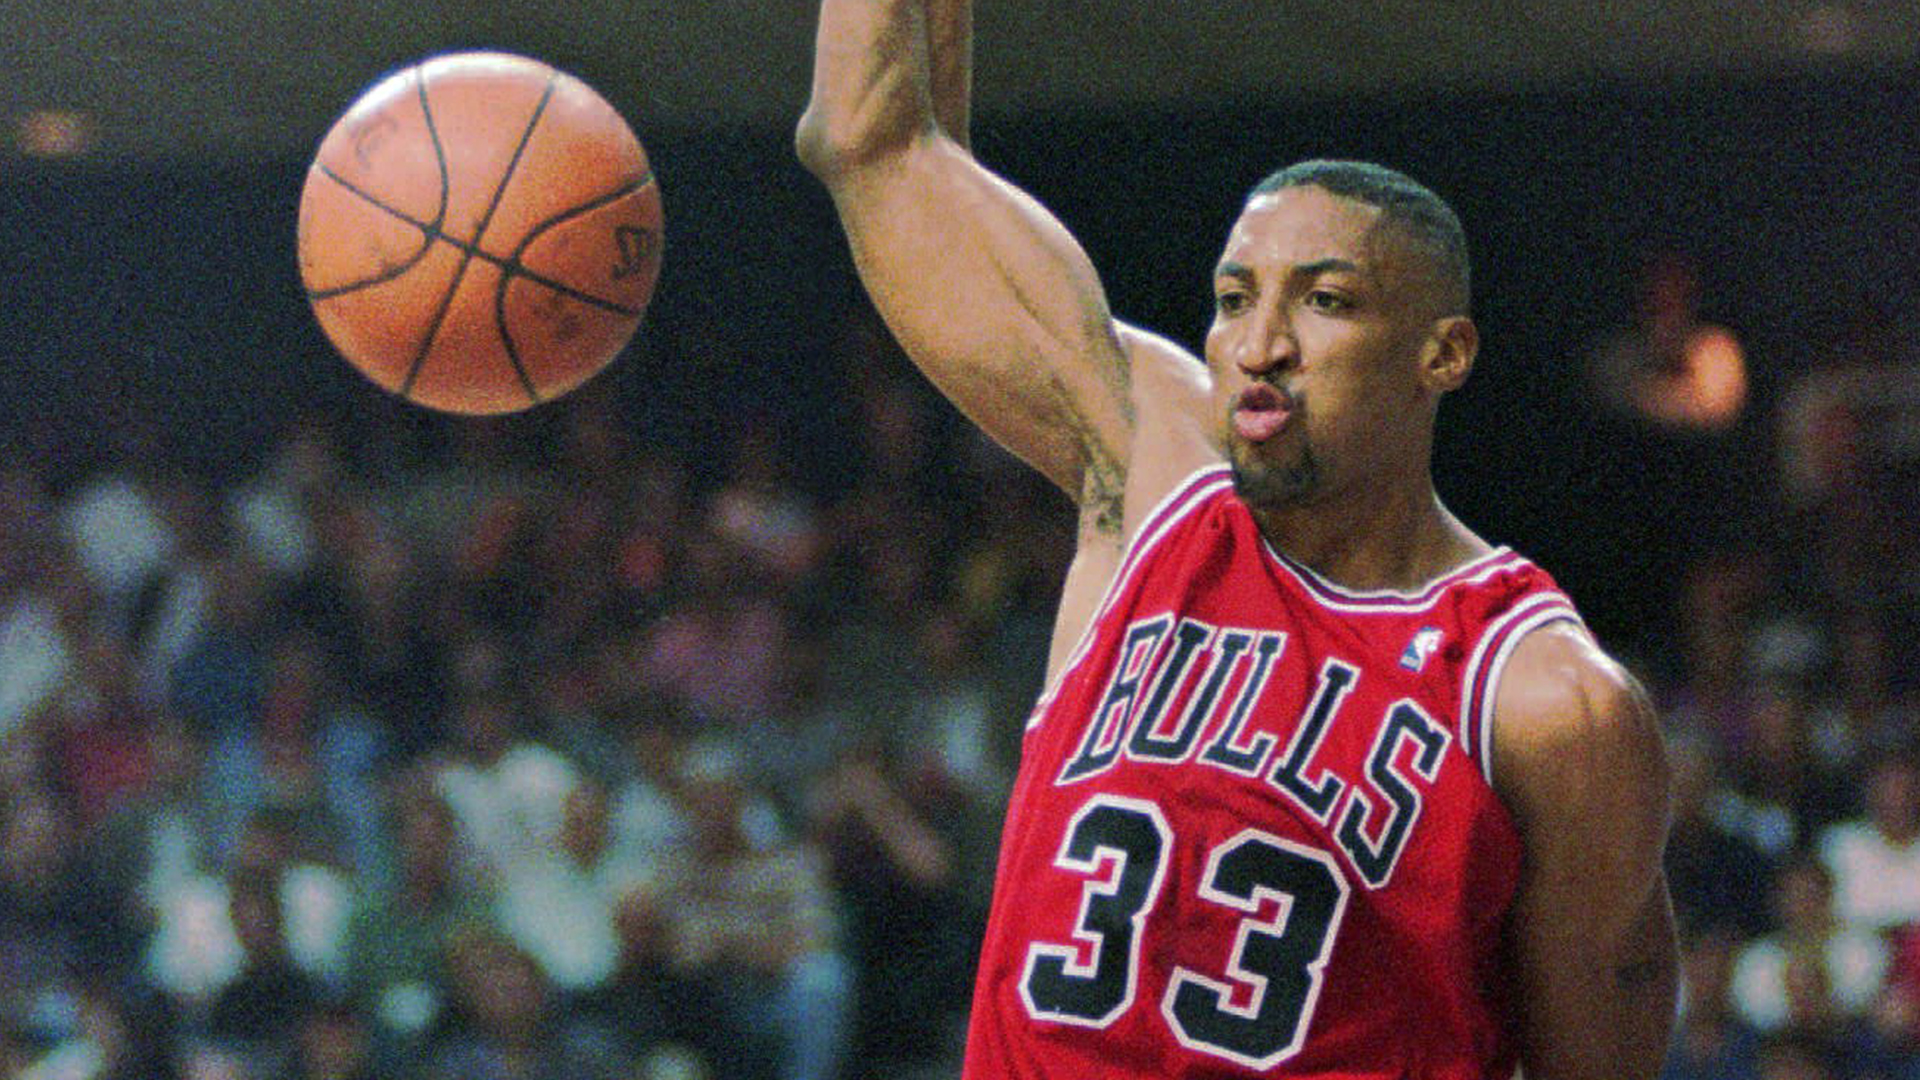 It's Been 28 Years Since Scottie Pippen Dunked on Patrick Ewing in